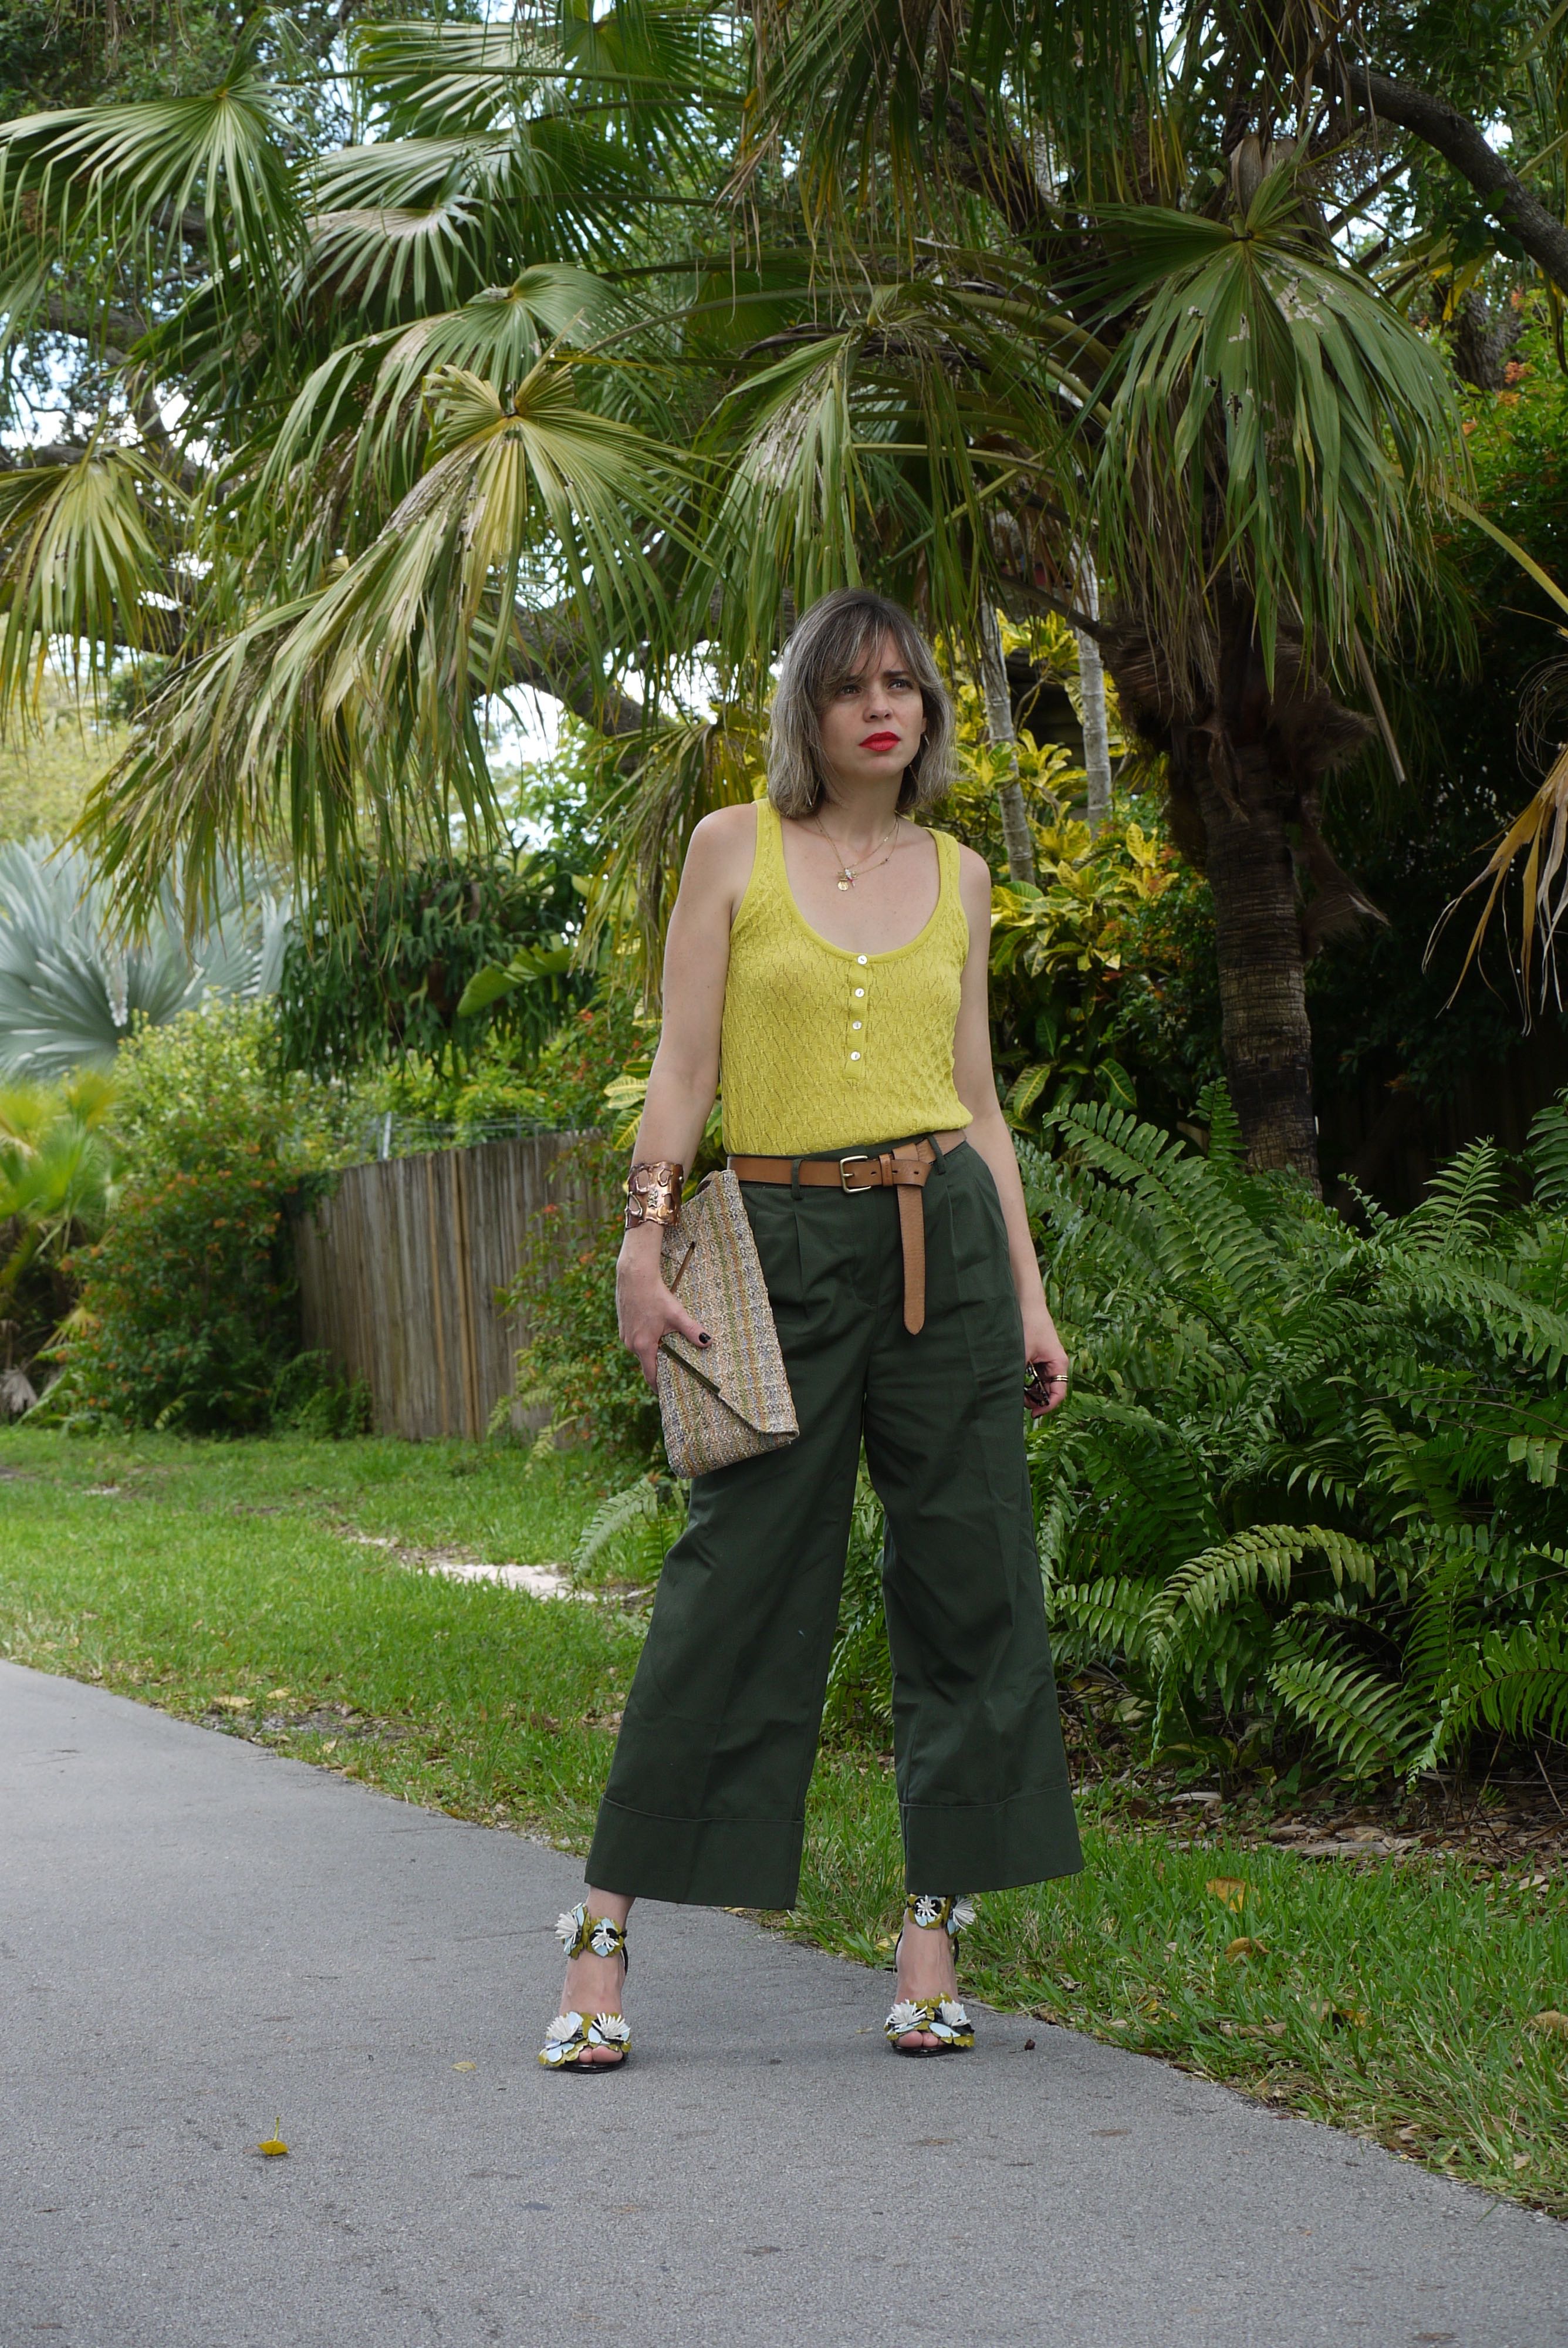 Alba Marina fashion blogger from Mylovelypeople blog shares with you how to combine a culottes pants from WhoWhatWear